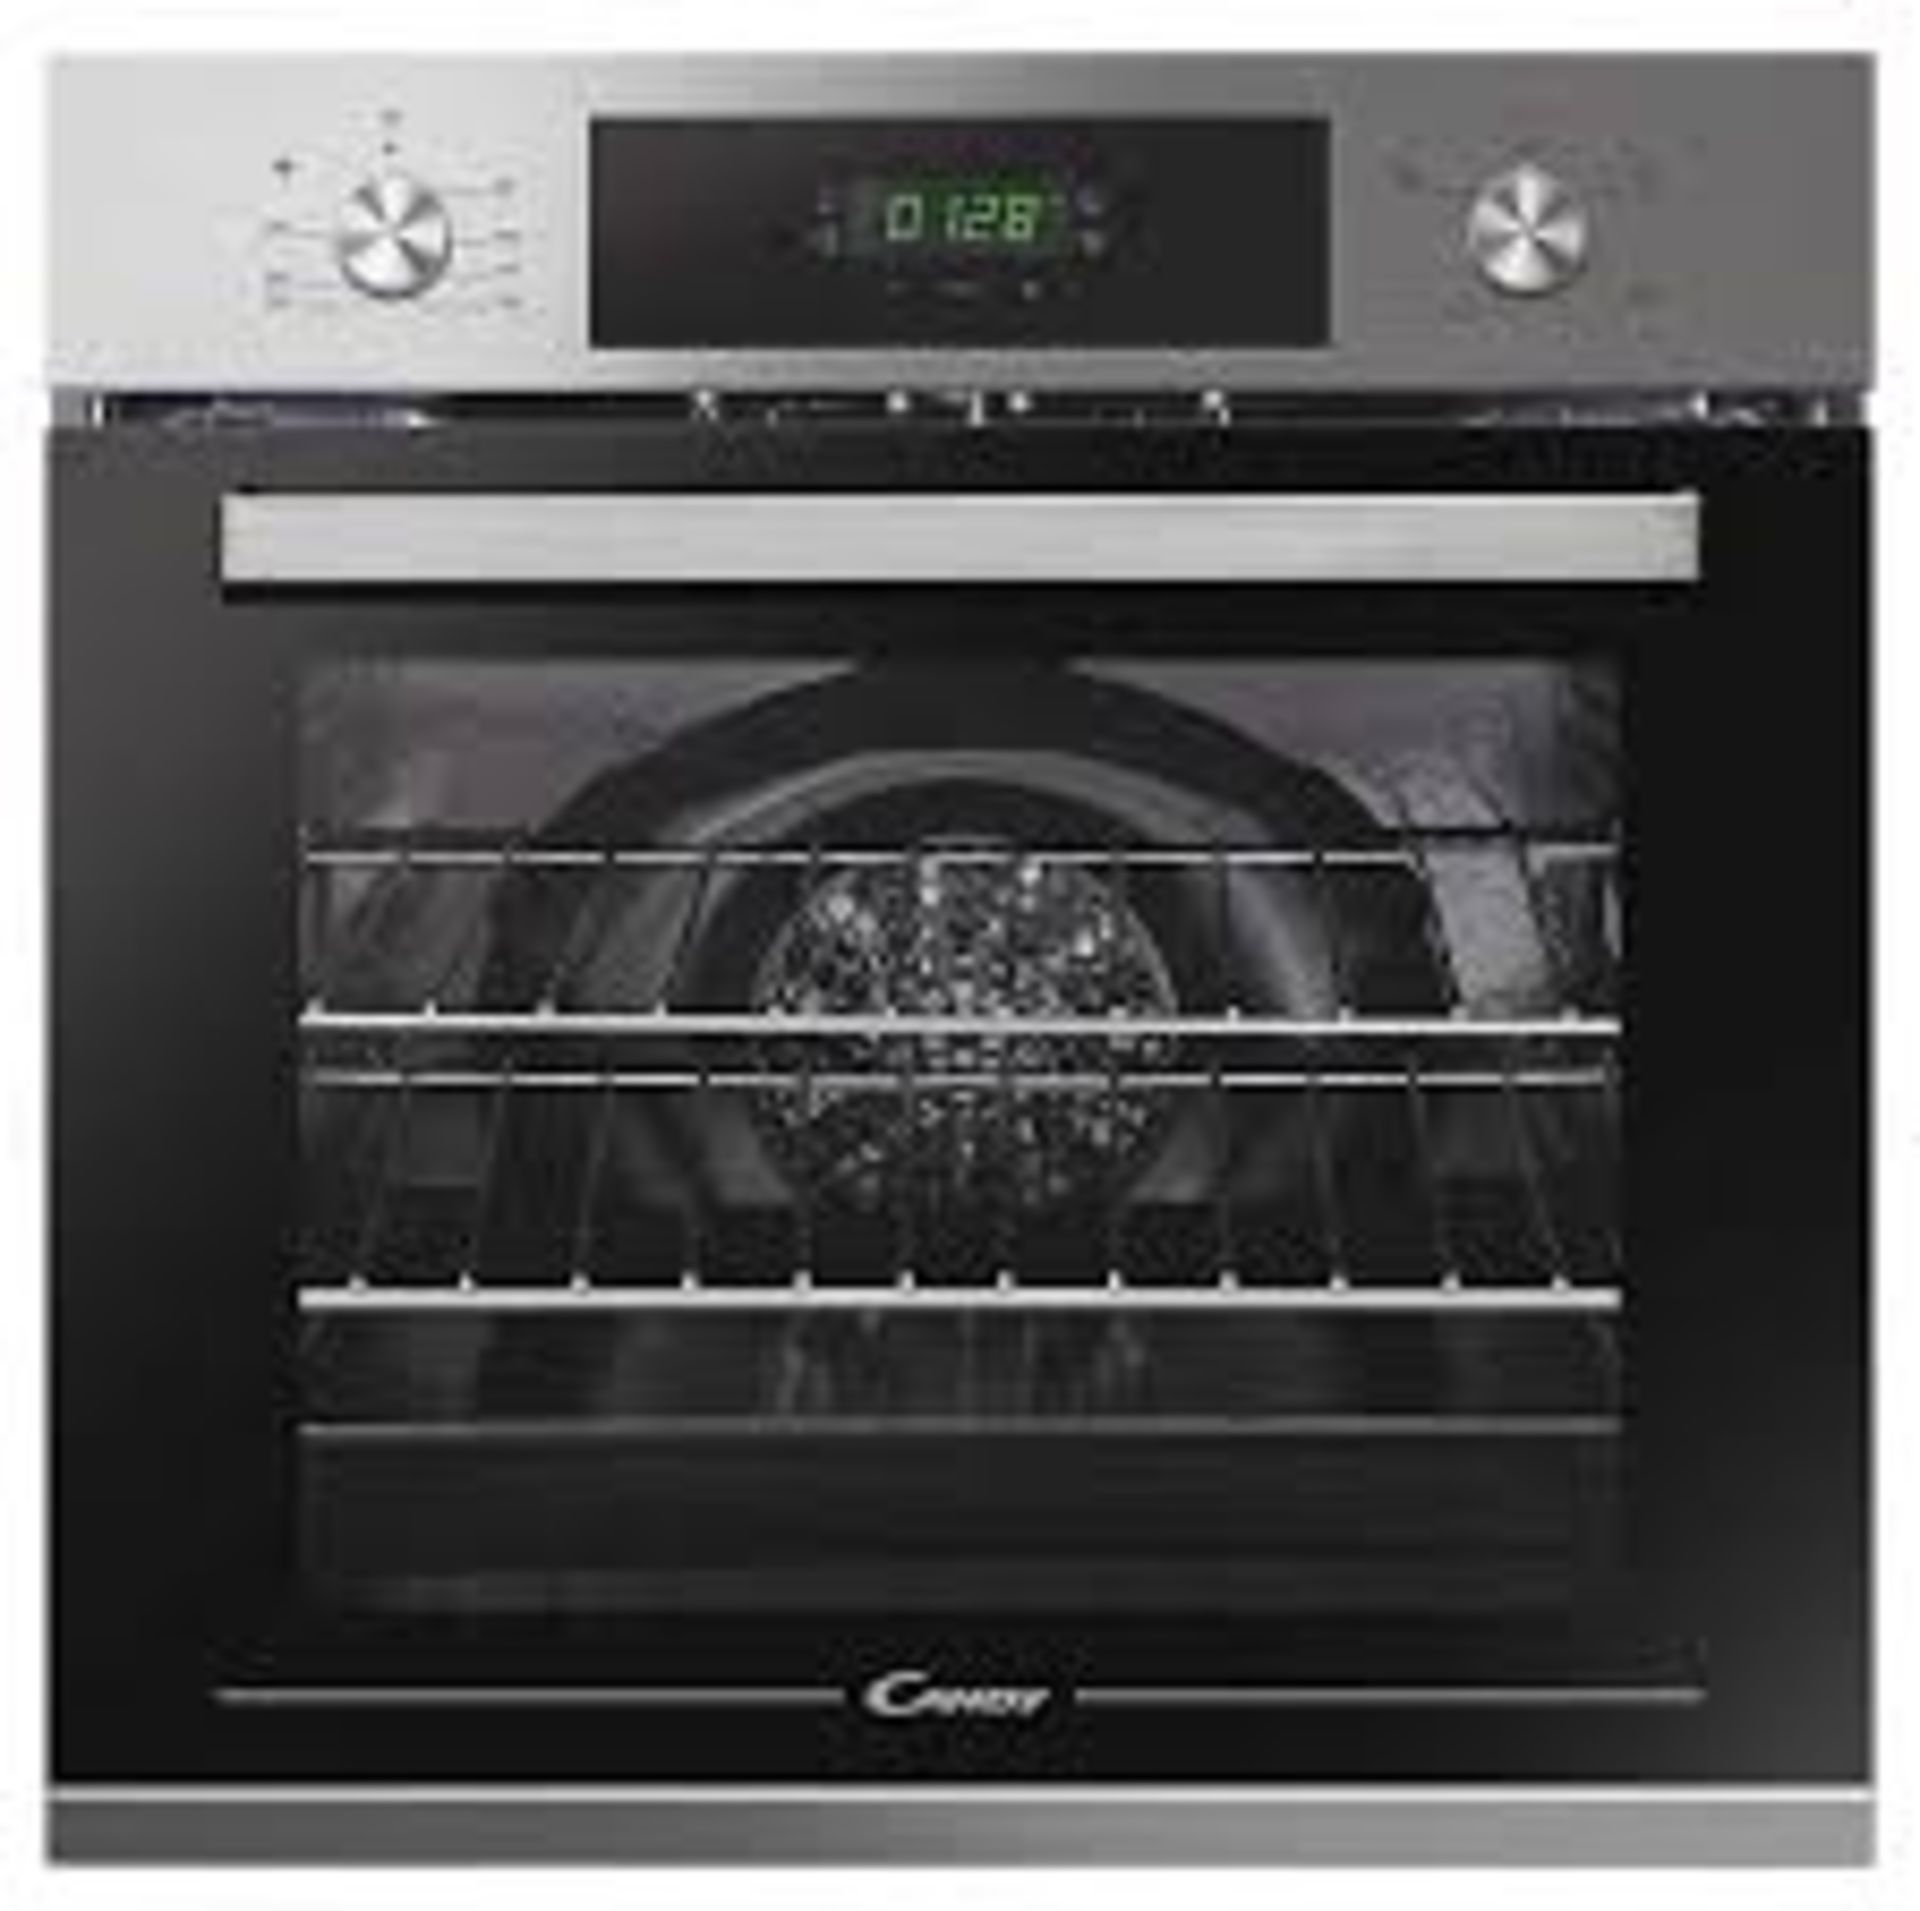 Candy Timeless FCT405X Built-in Single Fan Oven. - P5 *no door*